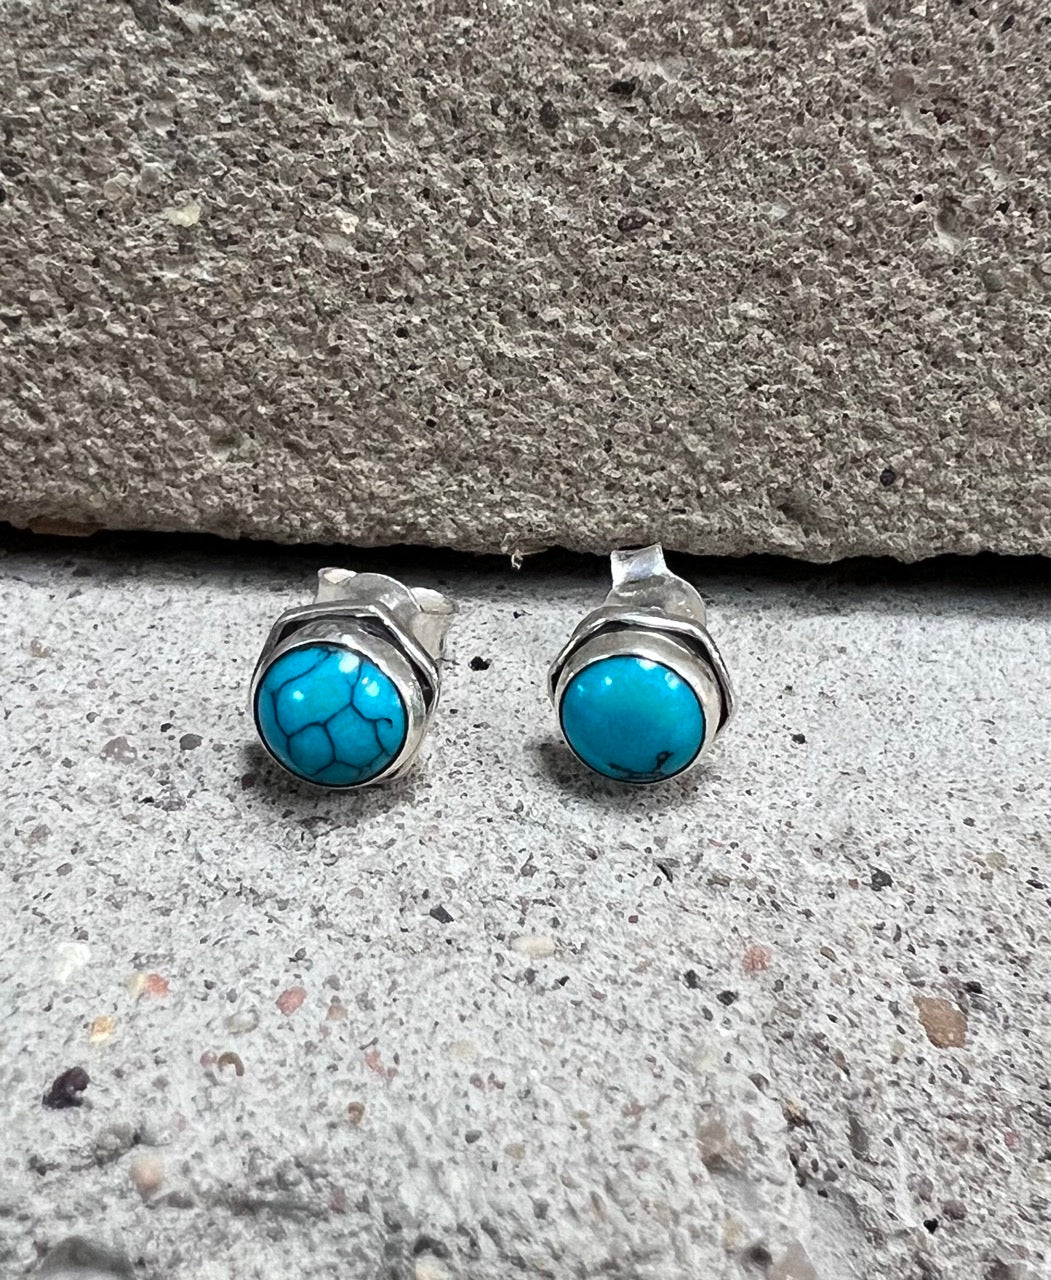 Small sterling silver studs with a round turquoise stone and a hexagonal surround